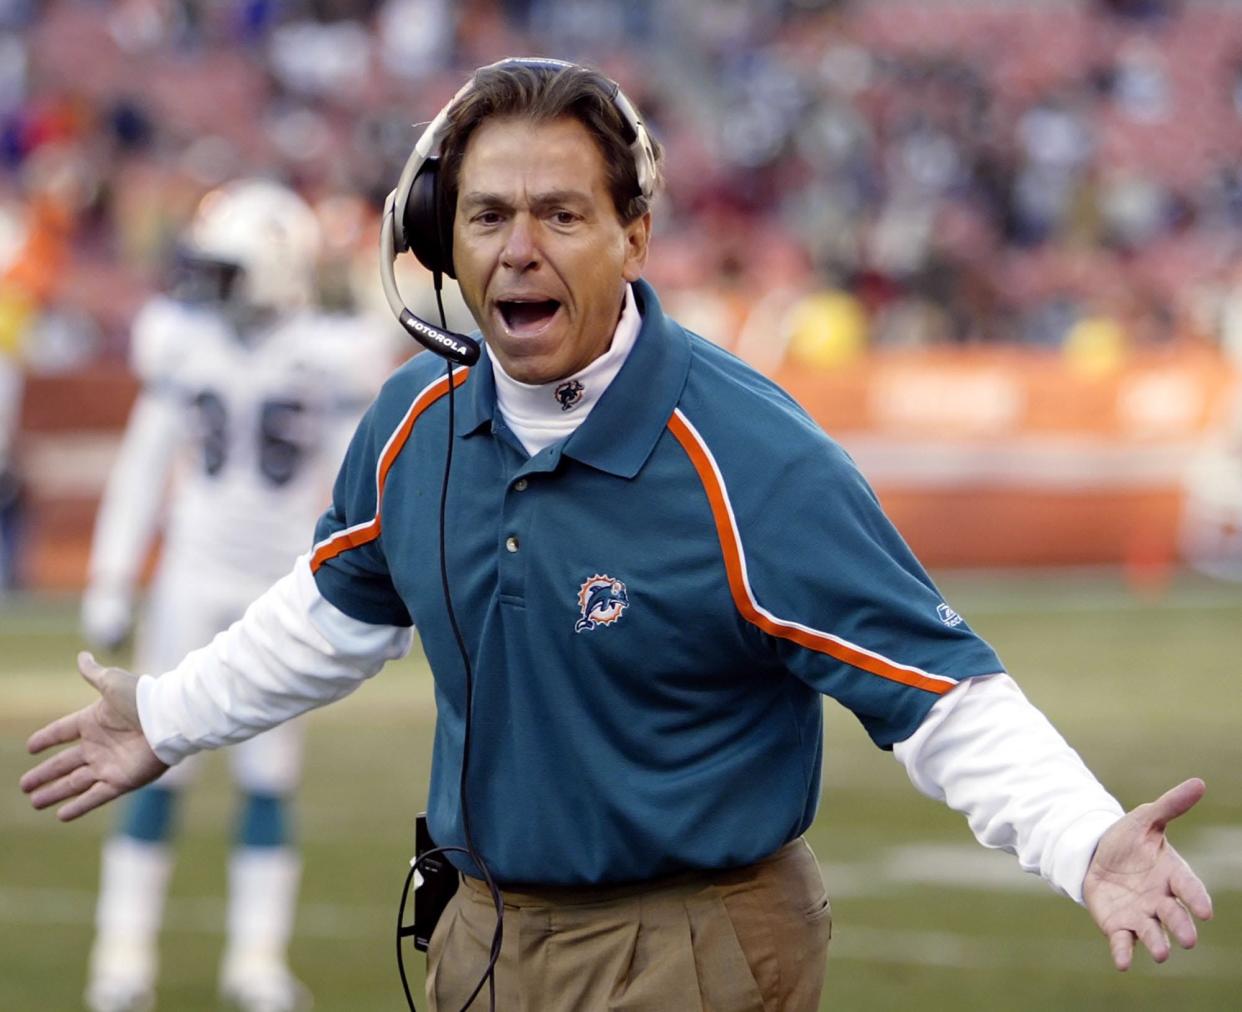 Miami Dolphins coach Nick Saban complains about a call in the fourth quarter of the Dolphins' 22-0 loss to the Cleveland Browns on Sunday, Nov. 20, 2005, in Cleveland. Credit: AMY SANCETTA, The Palm Beach Post